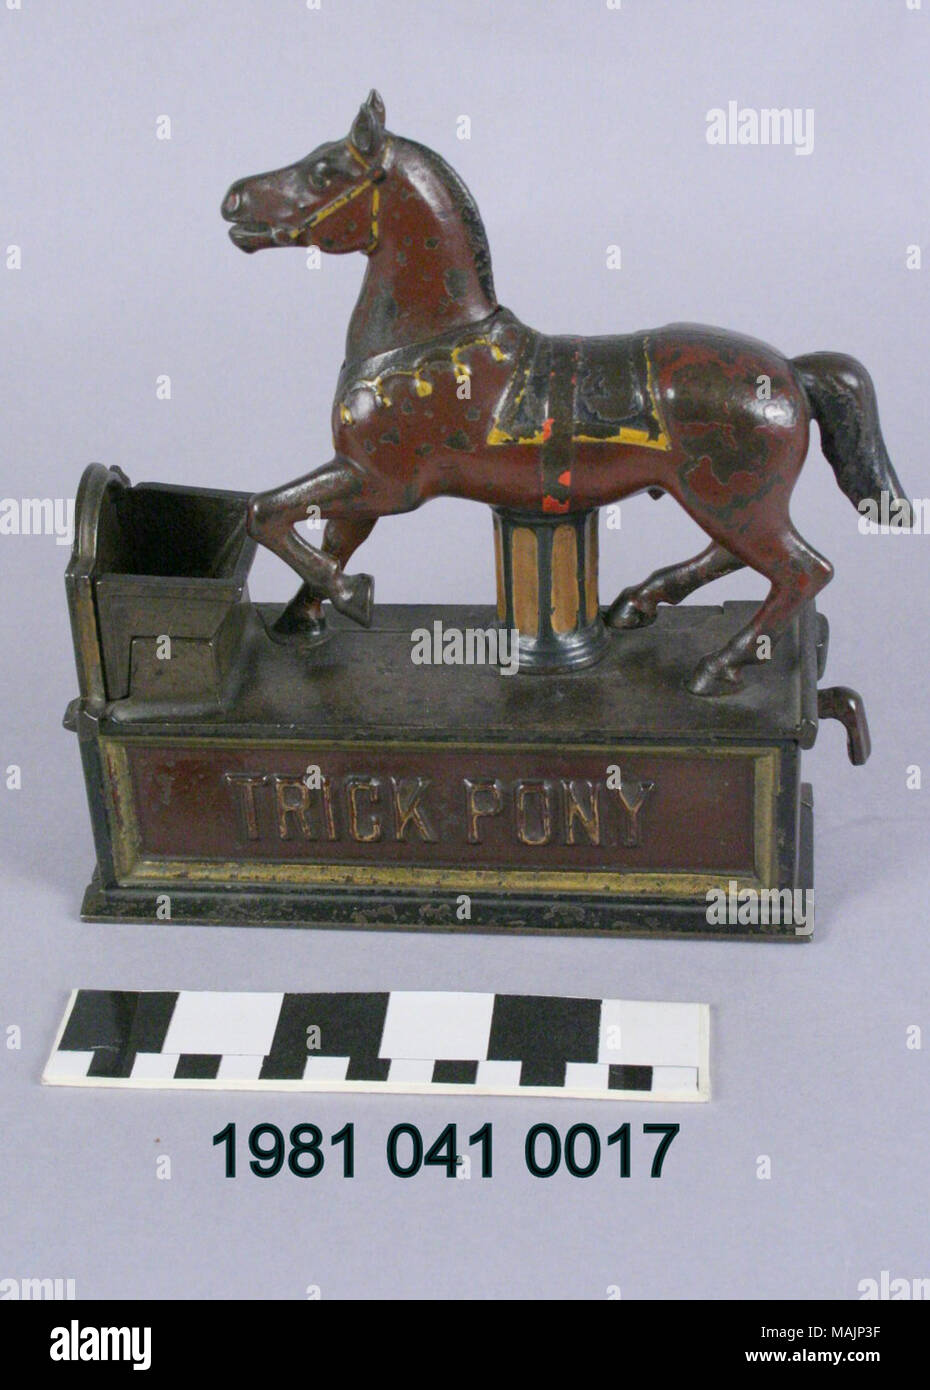 Cast iron mechanical bank in the shape of a horse near a trough. To operate the bank, a coin is placed in the horse's mouth. Pulling a lever on the side of the bank causes the trough floor to open and lowers the horse's head, allowing the coin to fall through the trough into the bank. Manufactured by the Shepard Hardware Company circa 1885. Title: Trick Pony Mechanical Coin Bank  . circa 1885. Peter Adams, Jr. (Designer), Charles G. Shepard (Designer), Shepard Hardware Company (Maker), Stock Photo